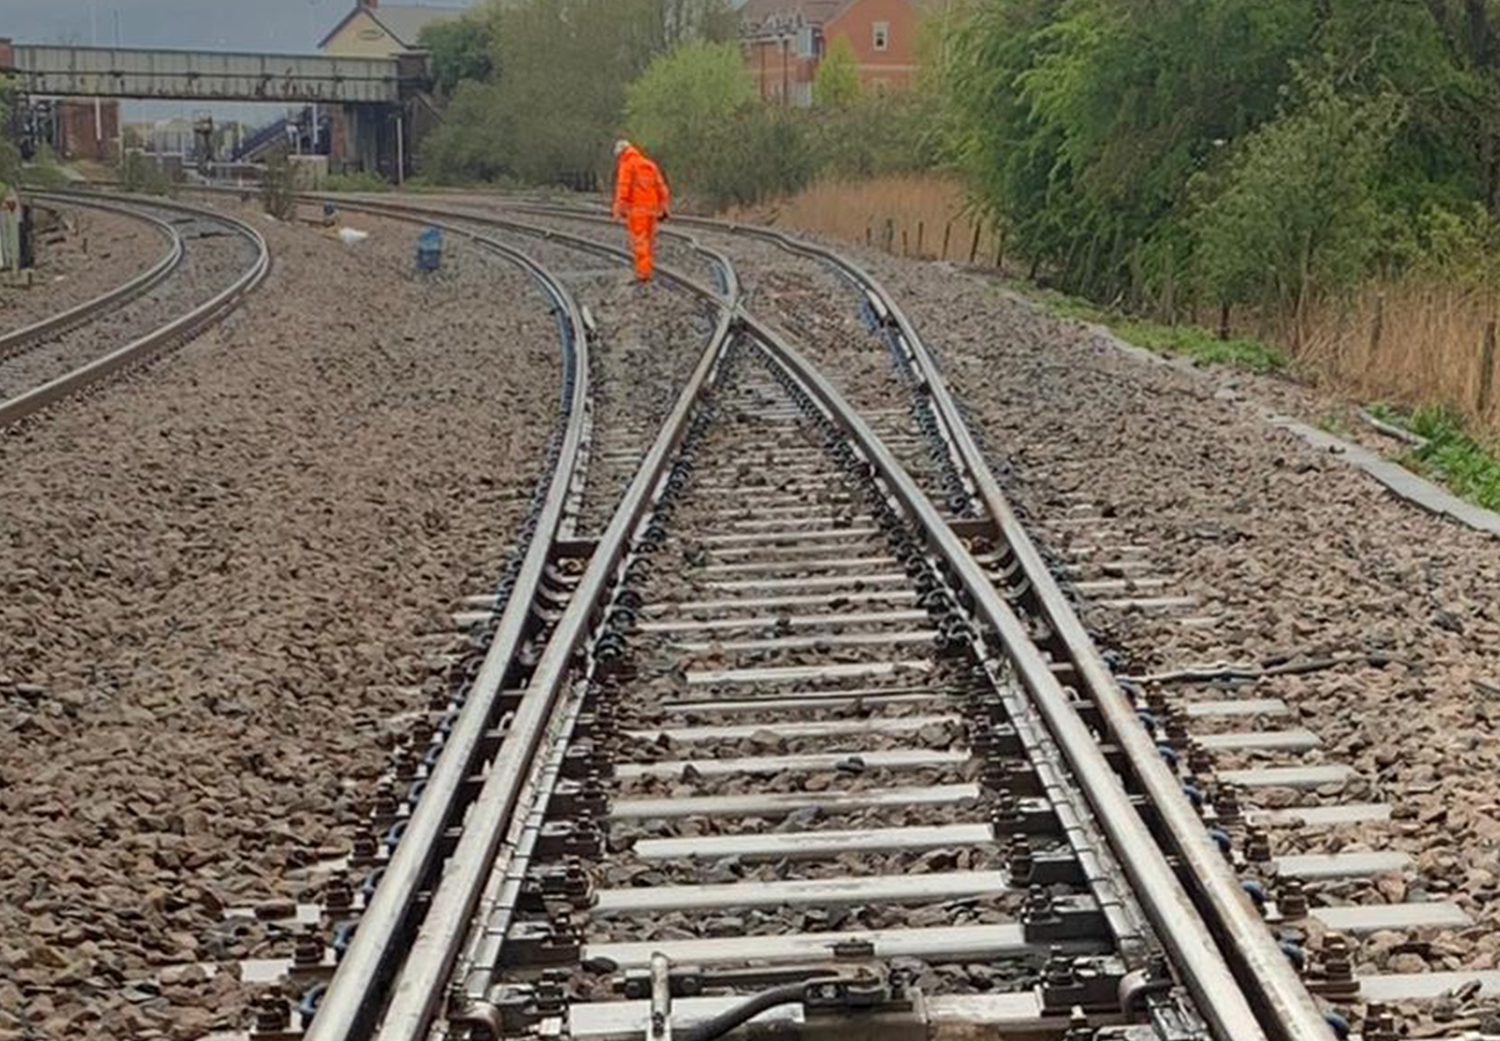 network-rail-completes-track-and-signalling-repairs-at-church-fenton-normal-service-resumes